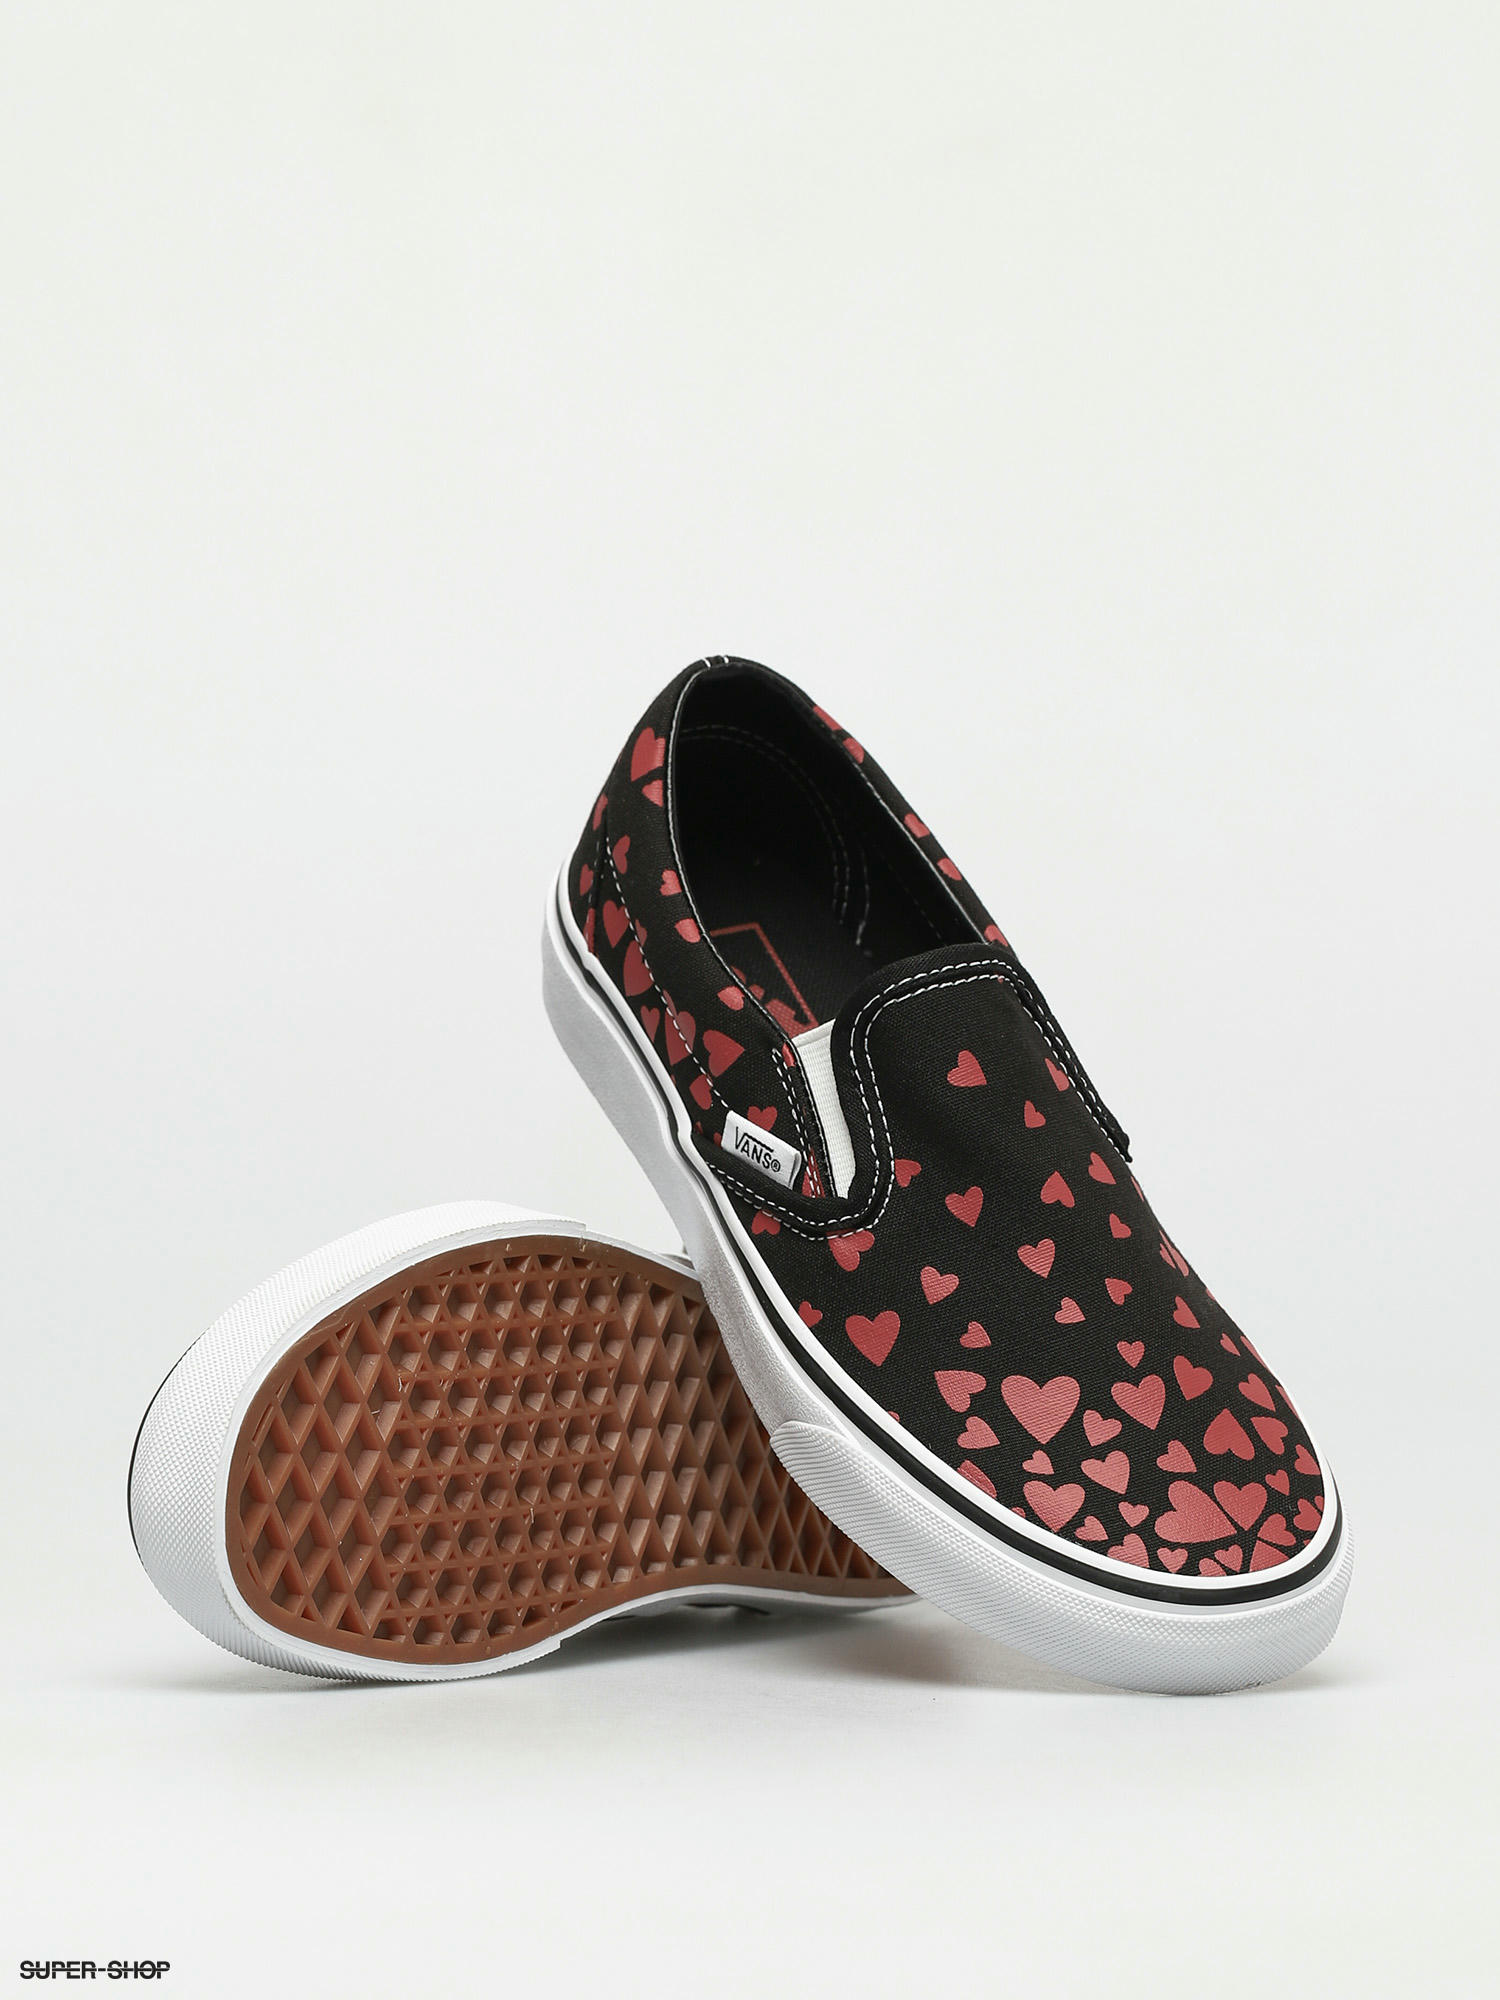 Vans Slip On Shoes (valentines hearts red)